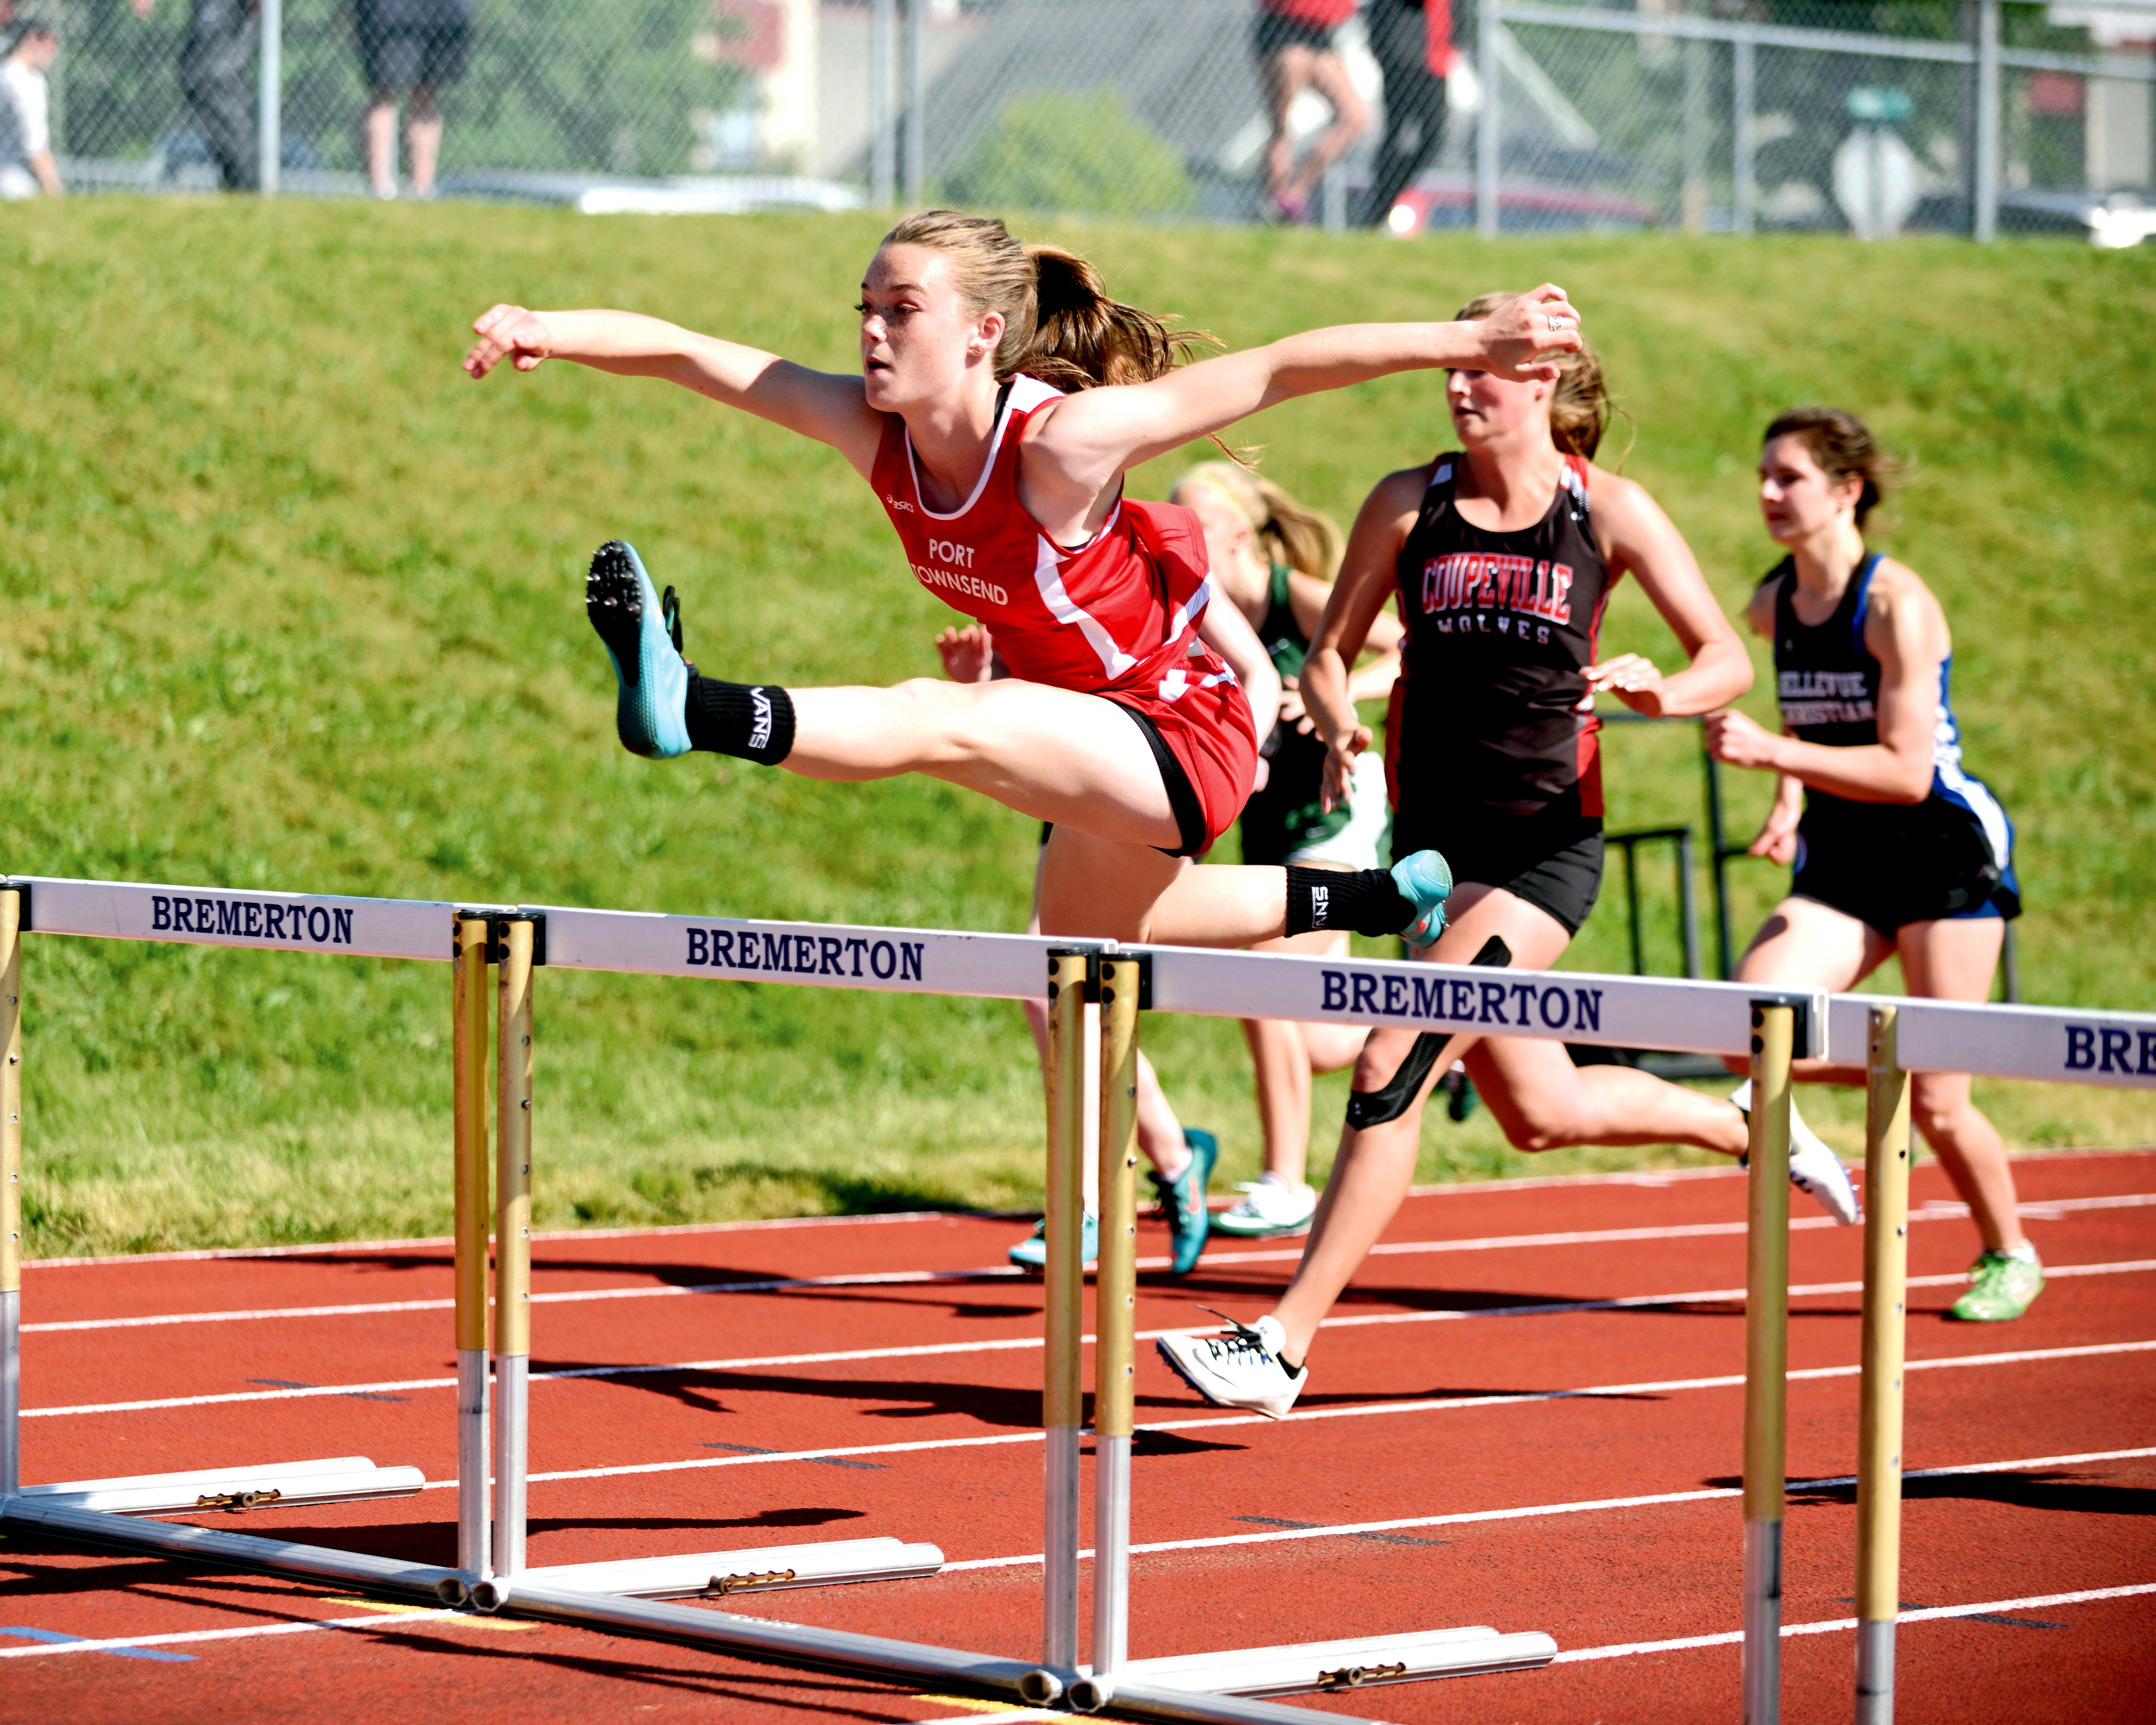 Port Townsend freshman Aubry Botkin took first in the 100- and 300-meter hurdles at the 1A West Central District meet at Bremerton High School. (Dave Shreffler/for Peninsula Daily News)